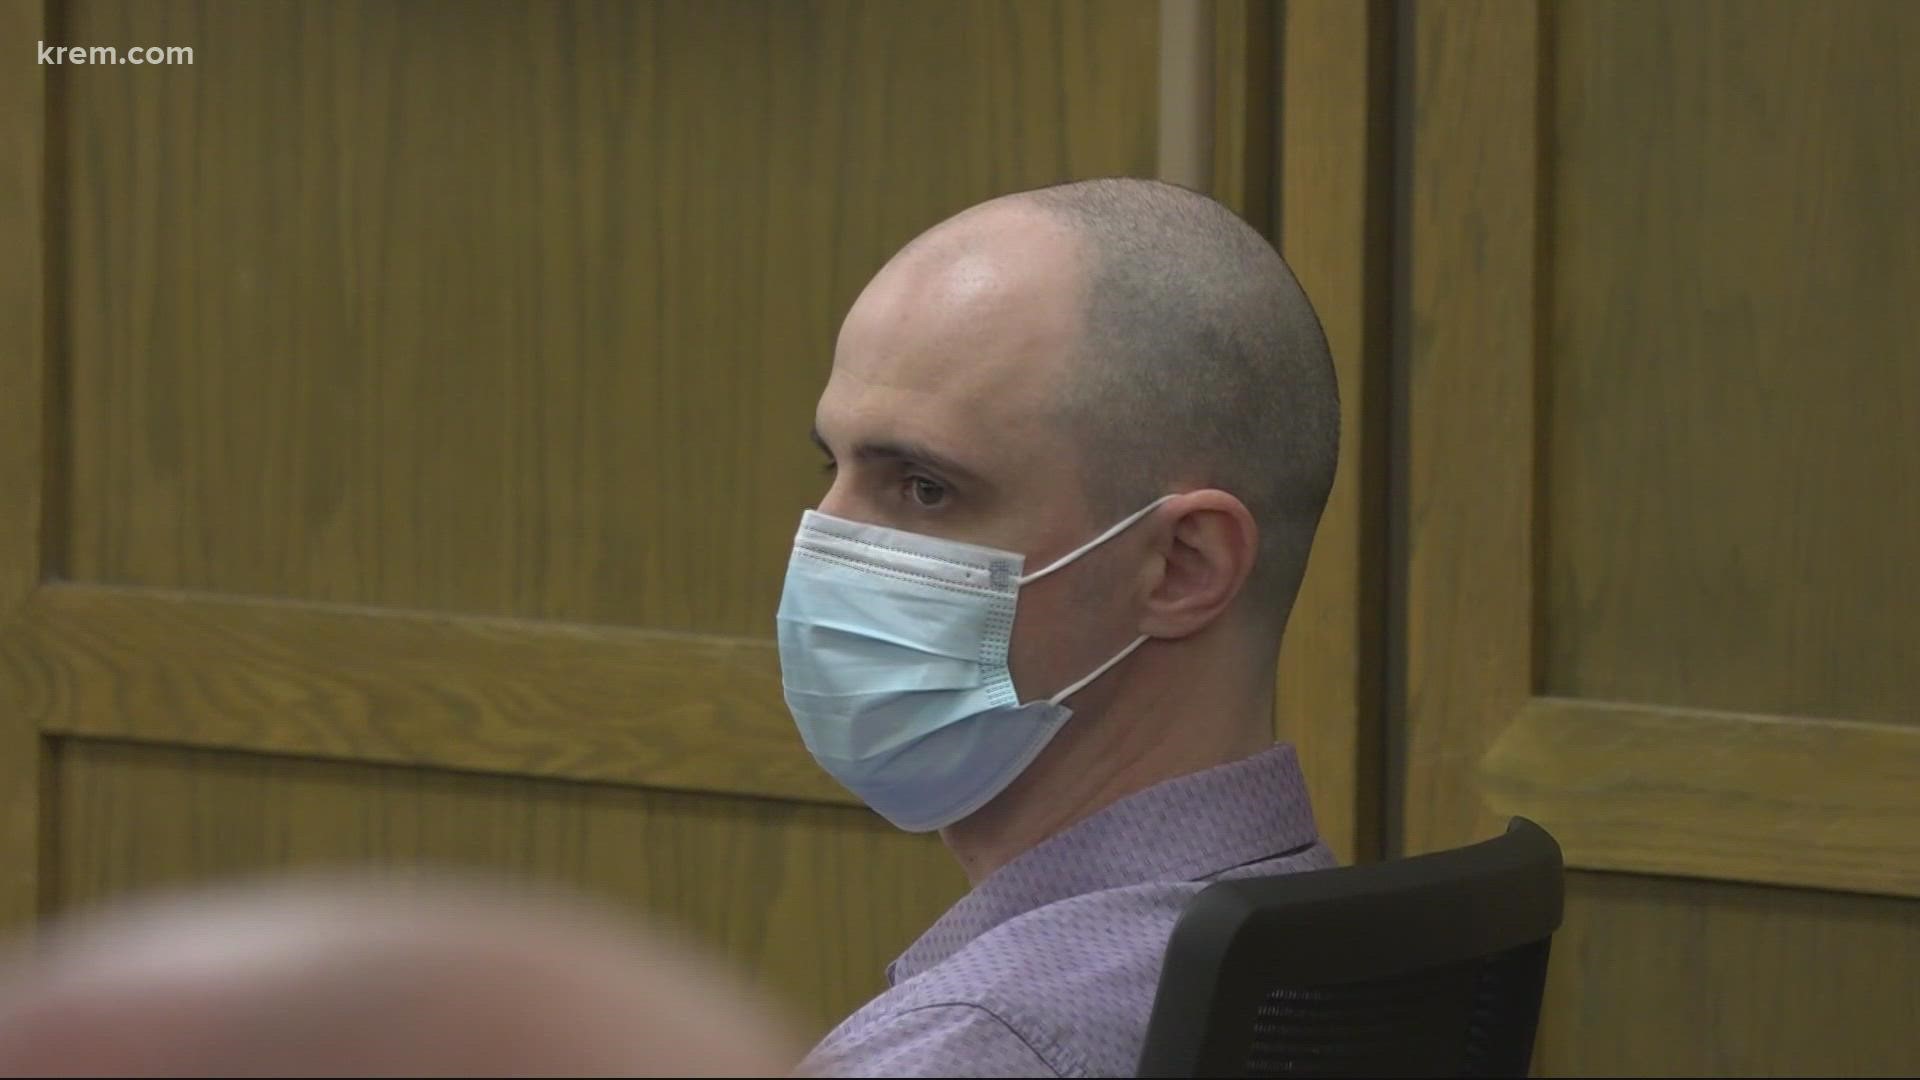 Nathan Beal is back in court for another first-degree murder charge.